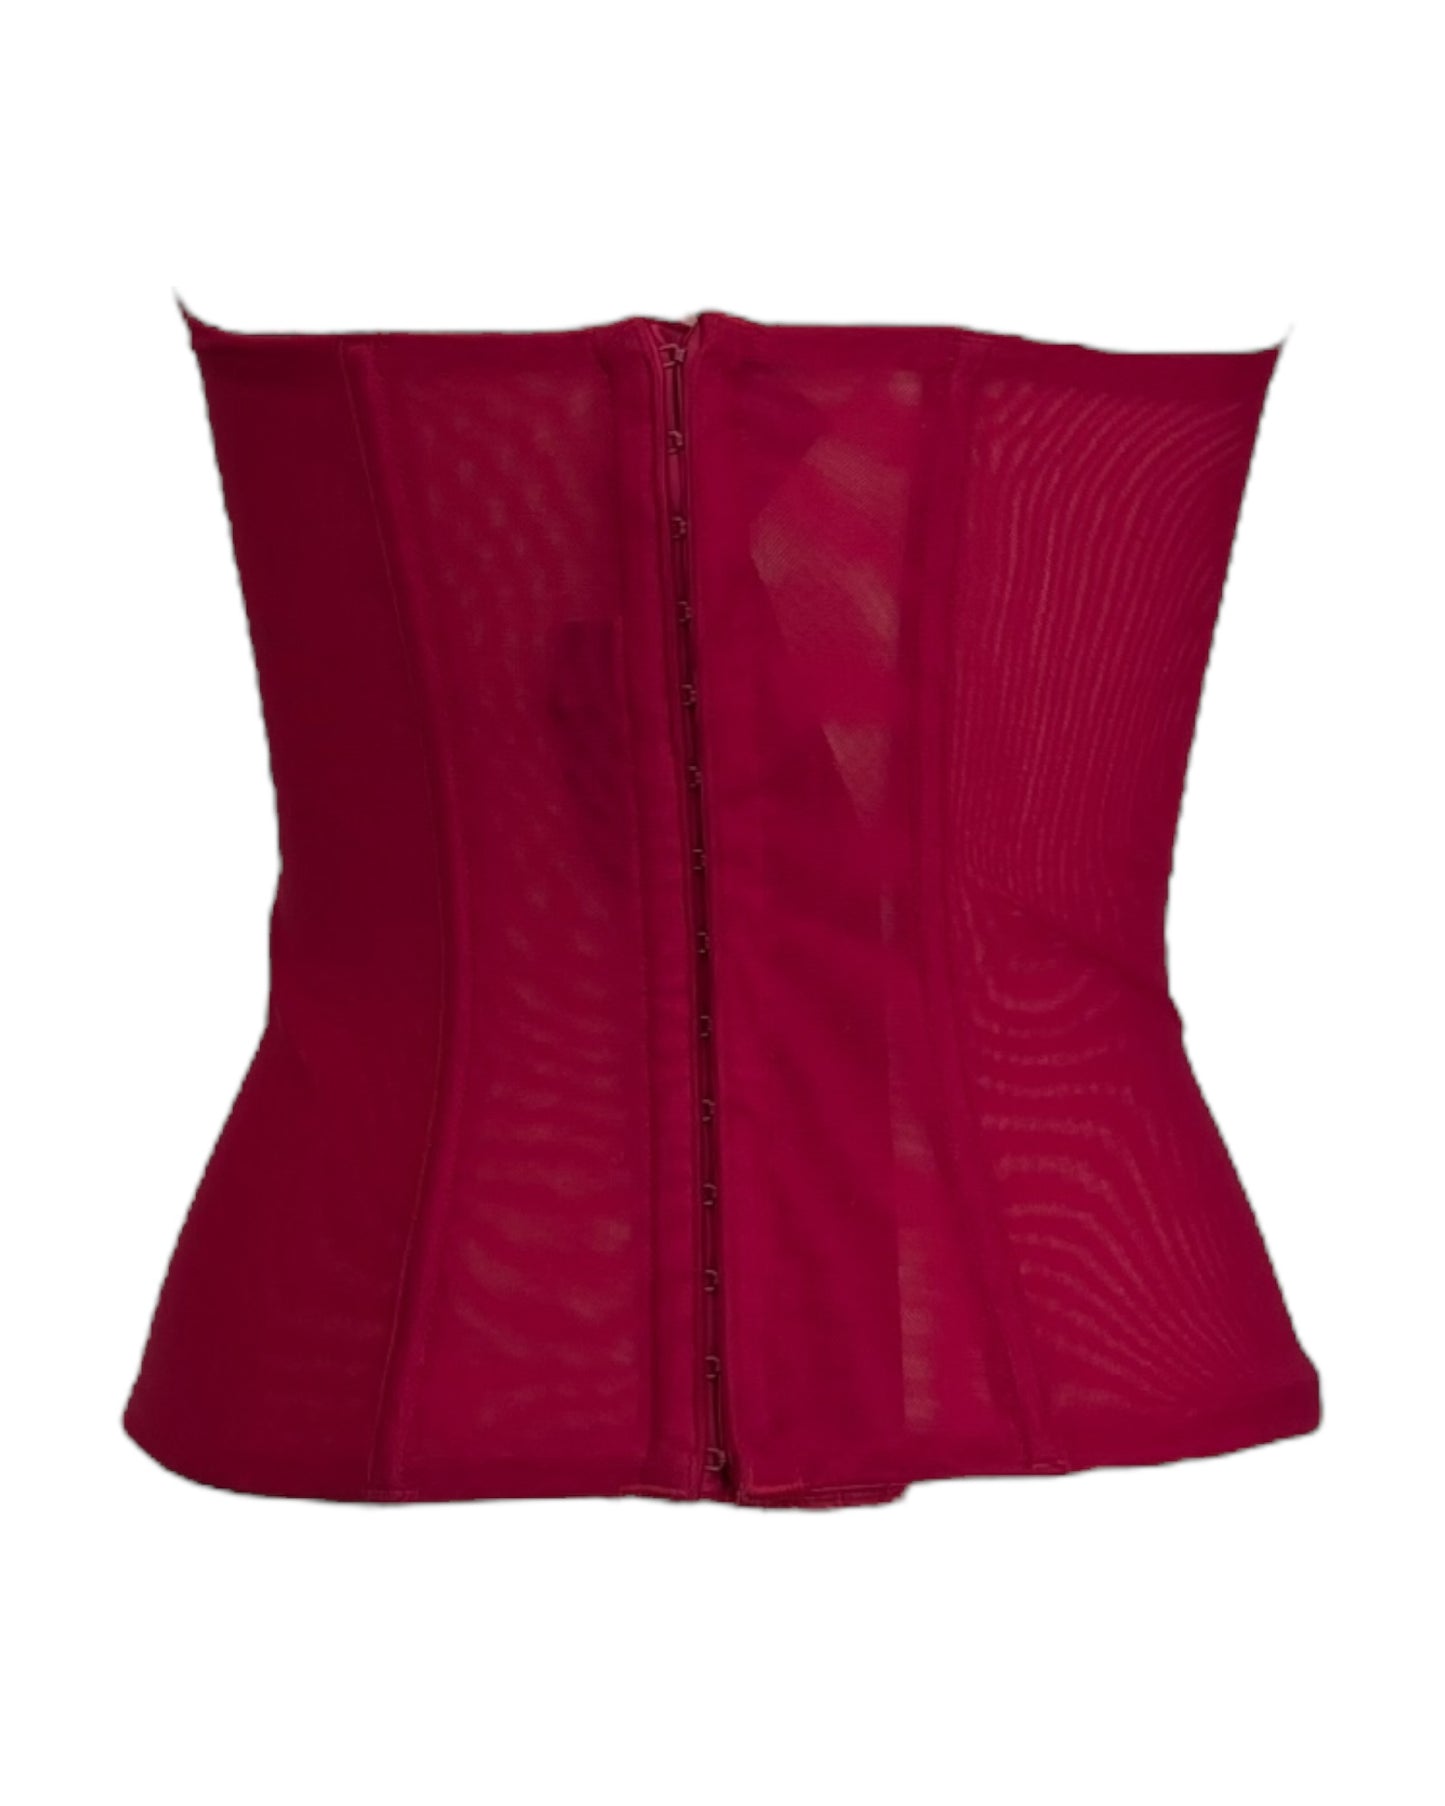 2000s Red Mesh Bustier